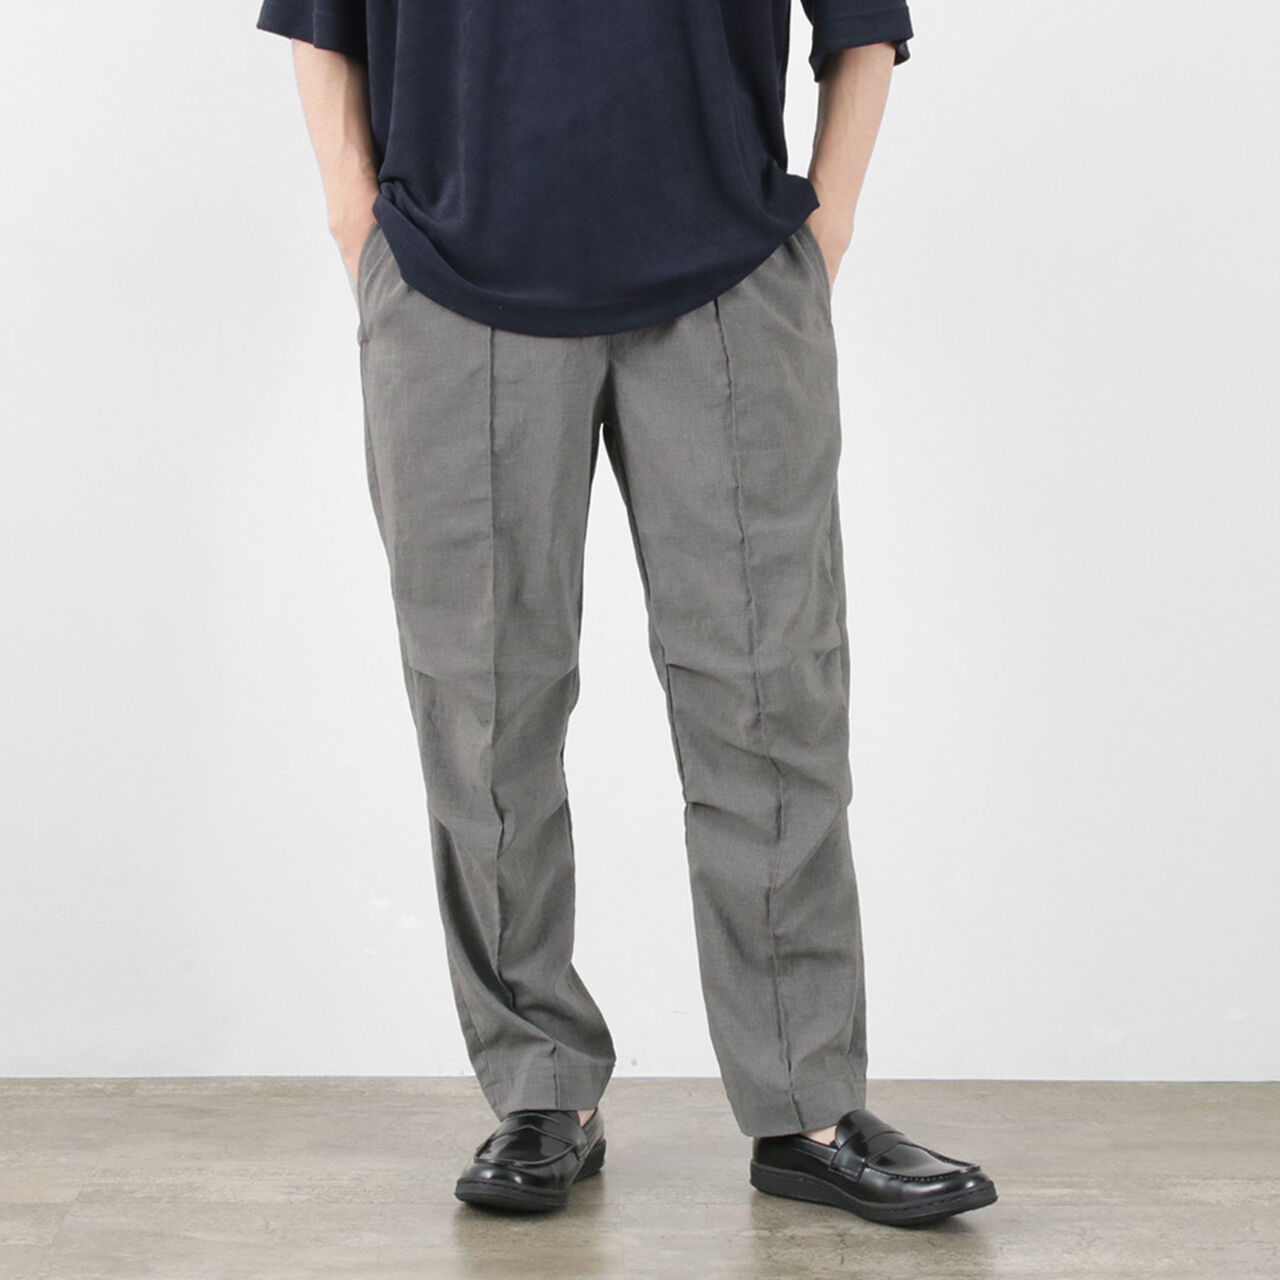 Active Easy Pants,Grey, large image number 0